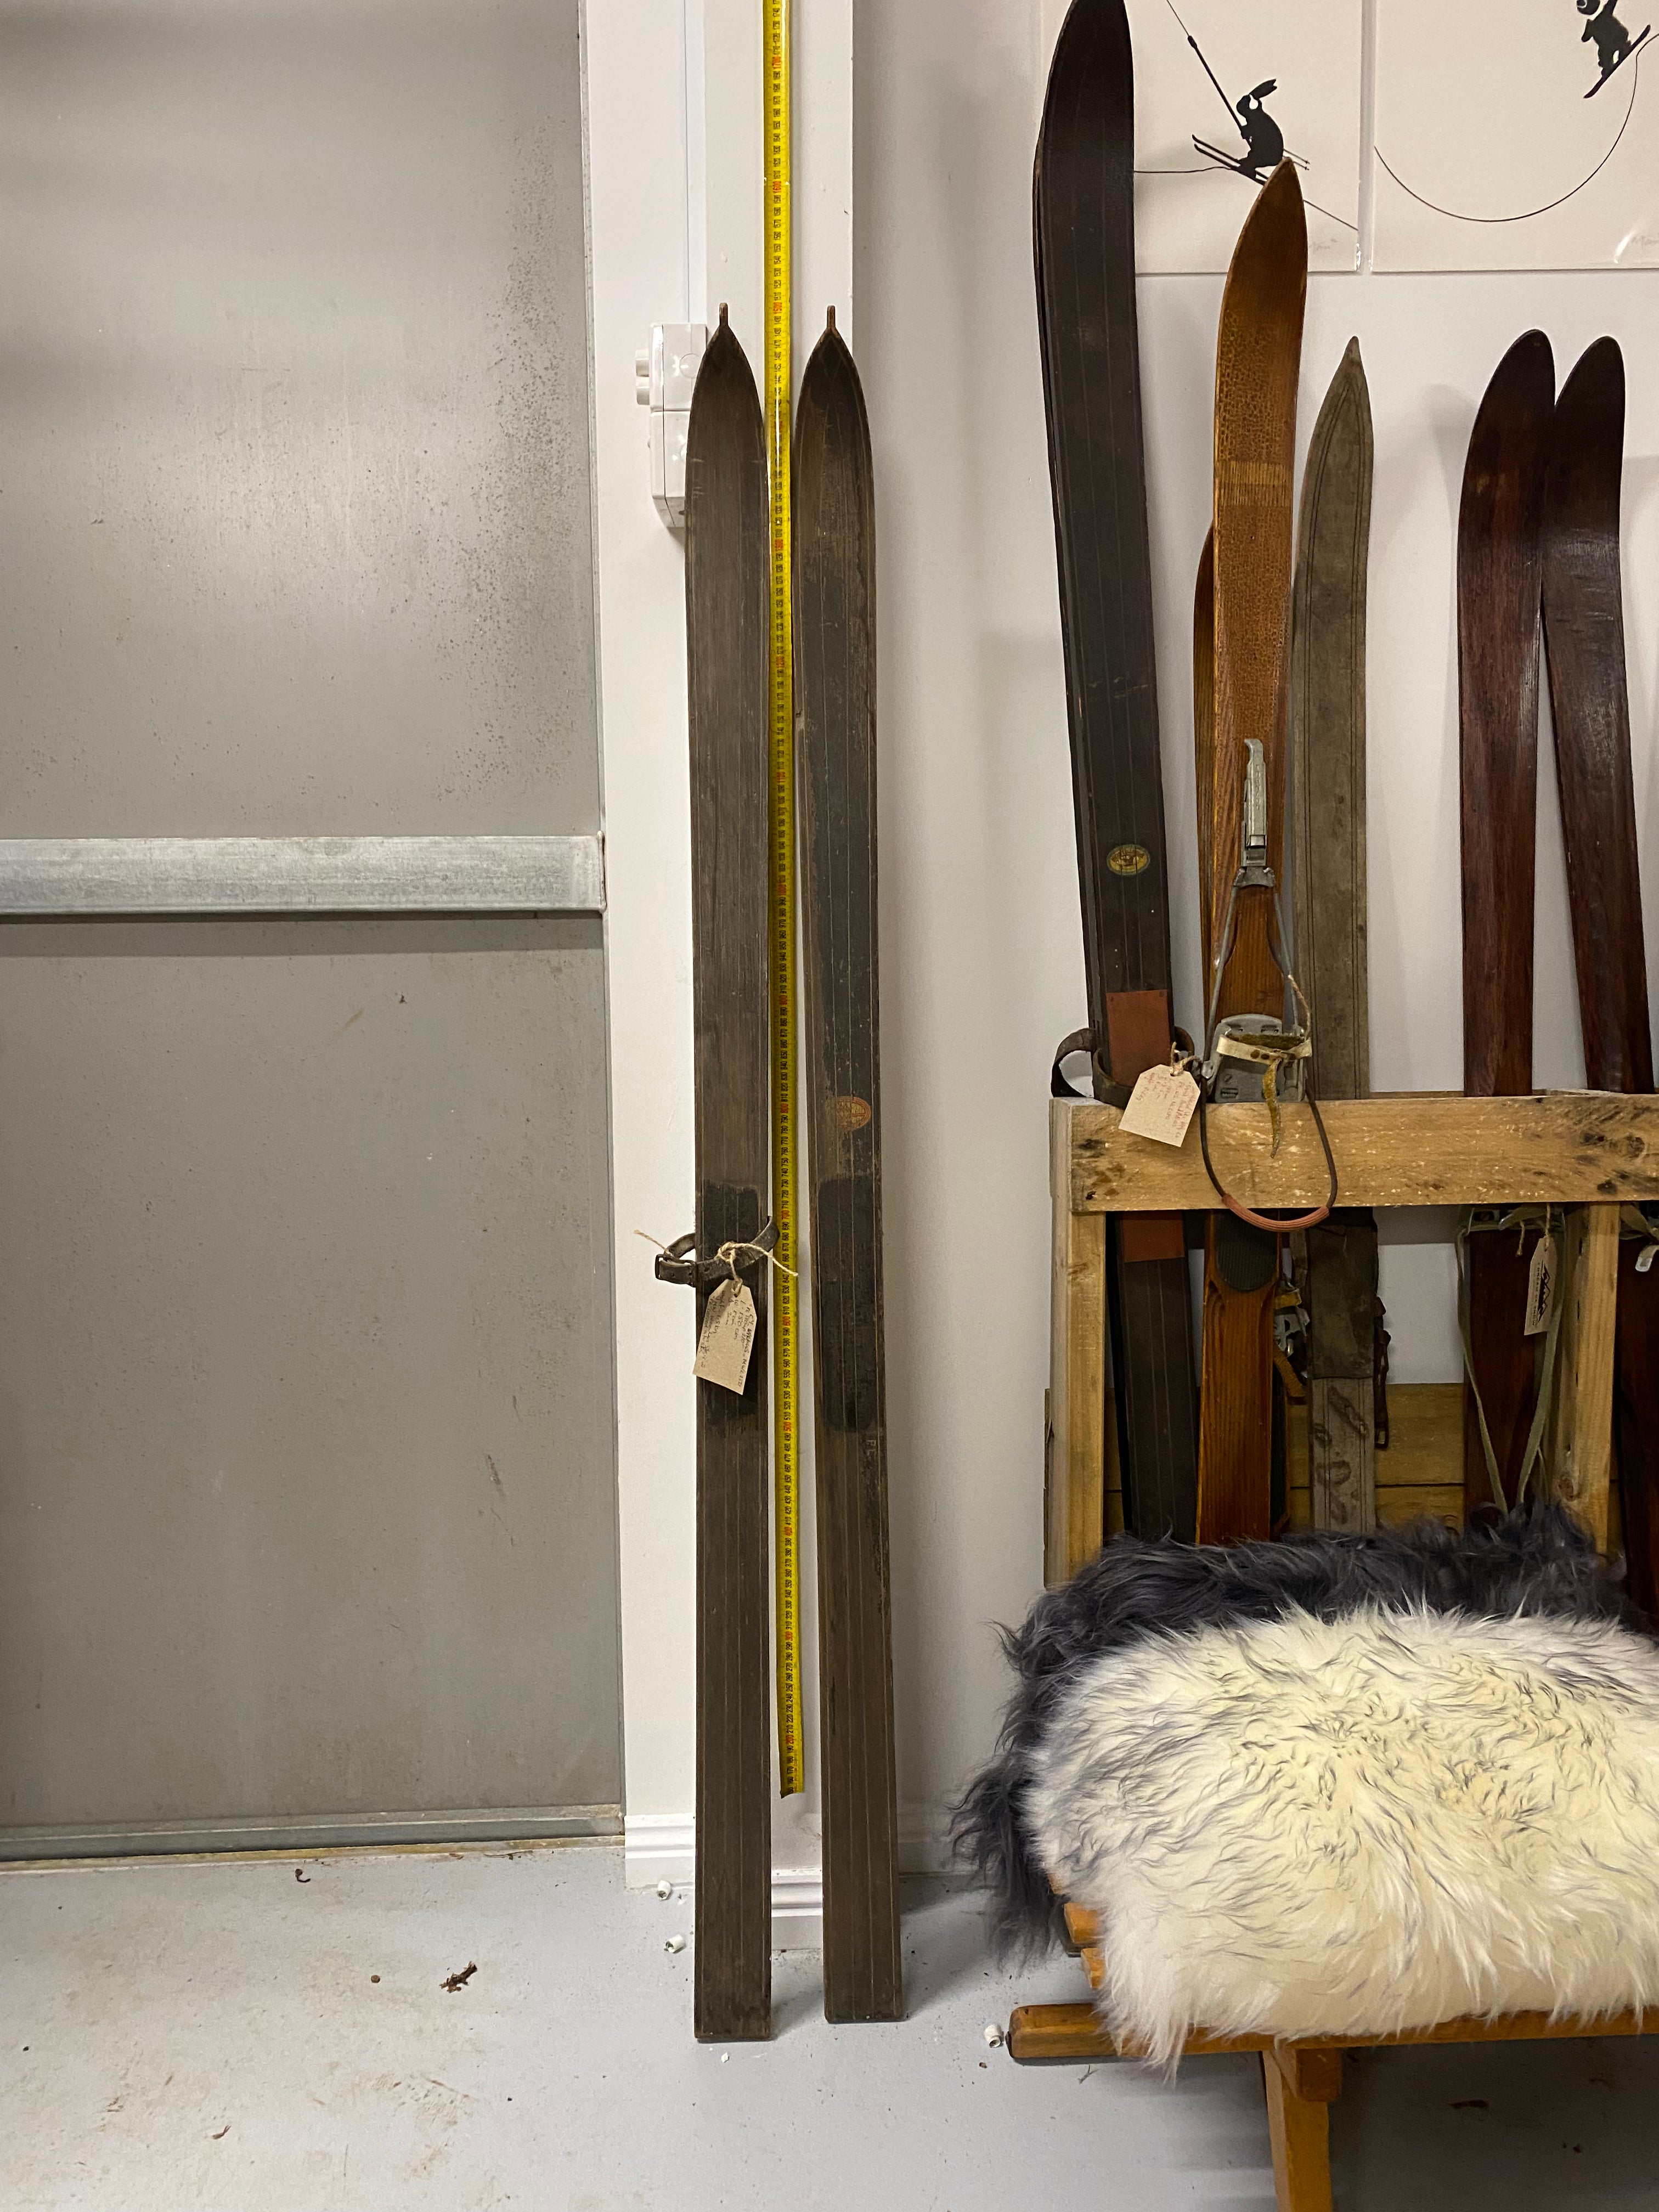 Full Height front view: Montgomery Ward vintage wooden skis. 1 skis with a leather strap. 1 ski sun faded. leaning against white painted wall with yellow measuring tape. More wooden skis stacked to the right hand side